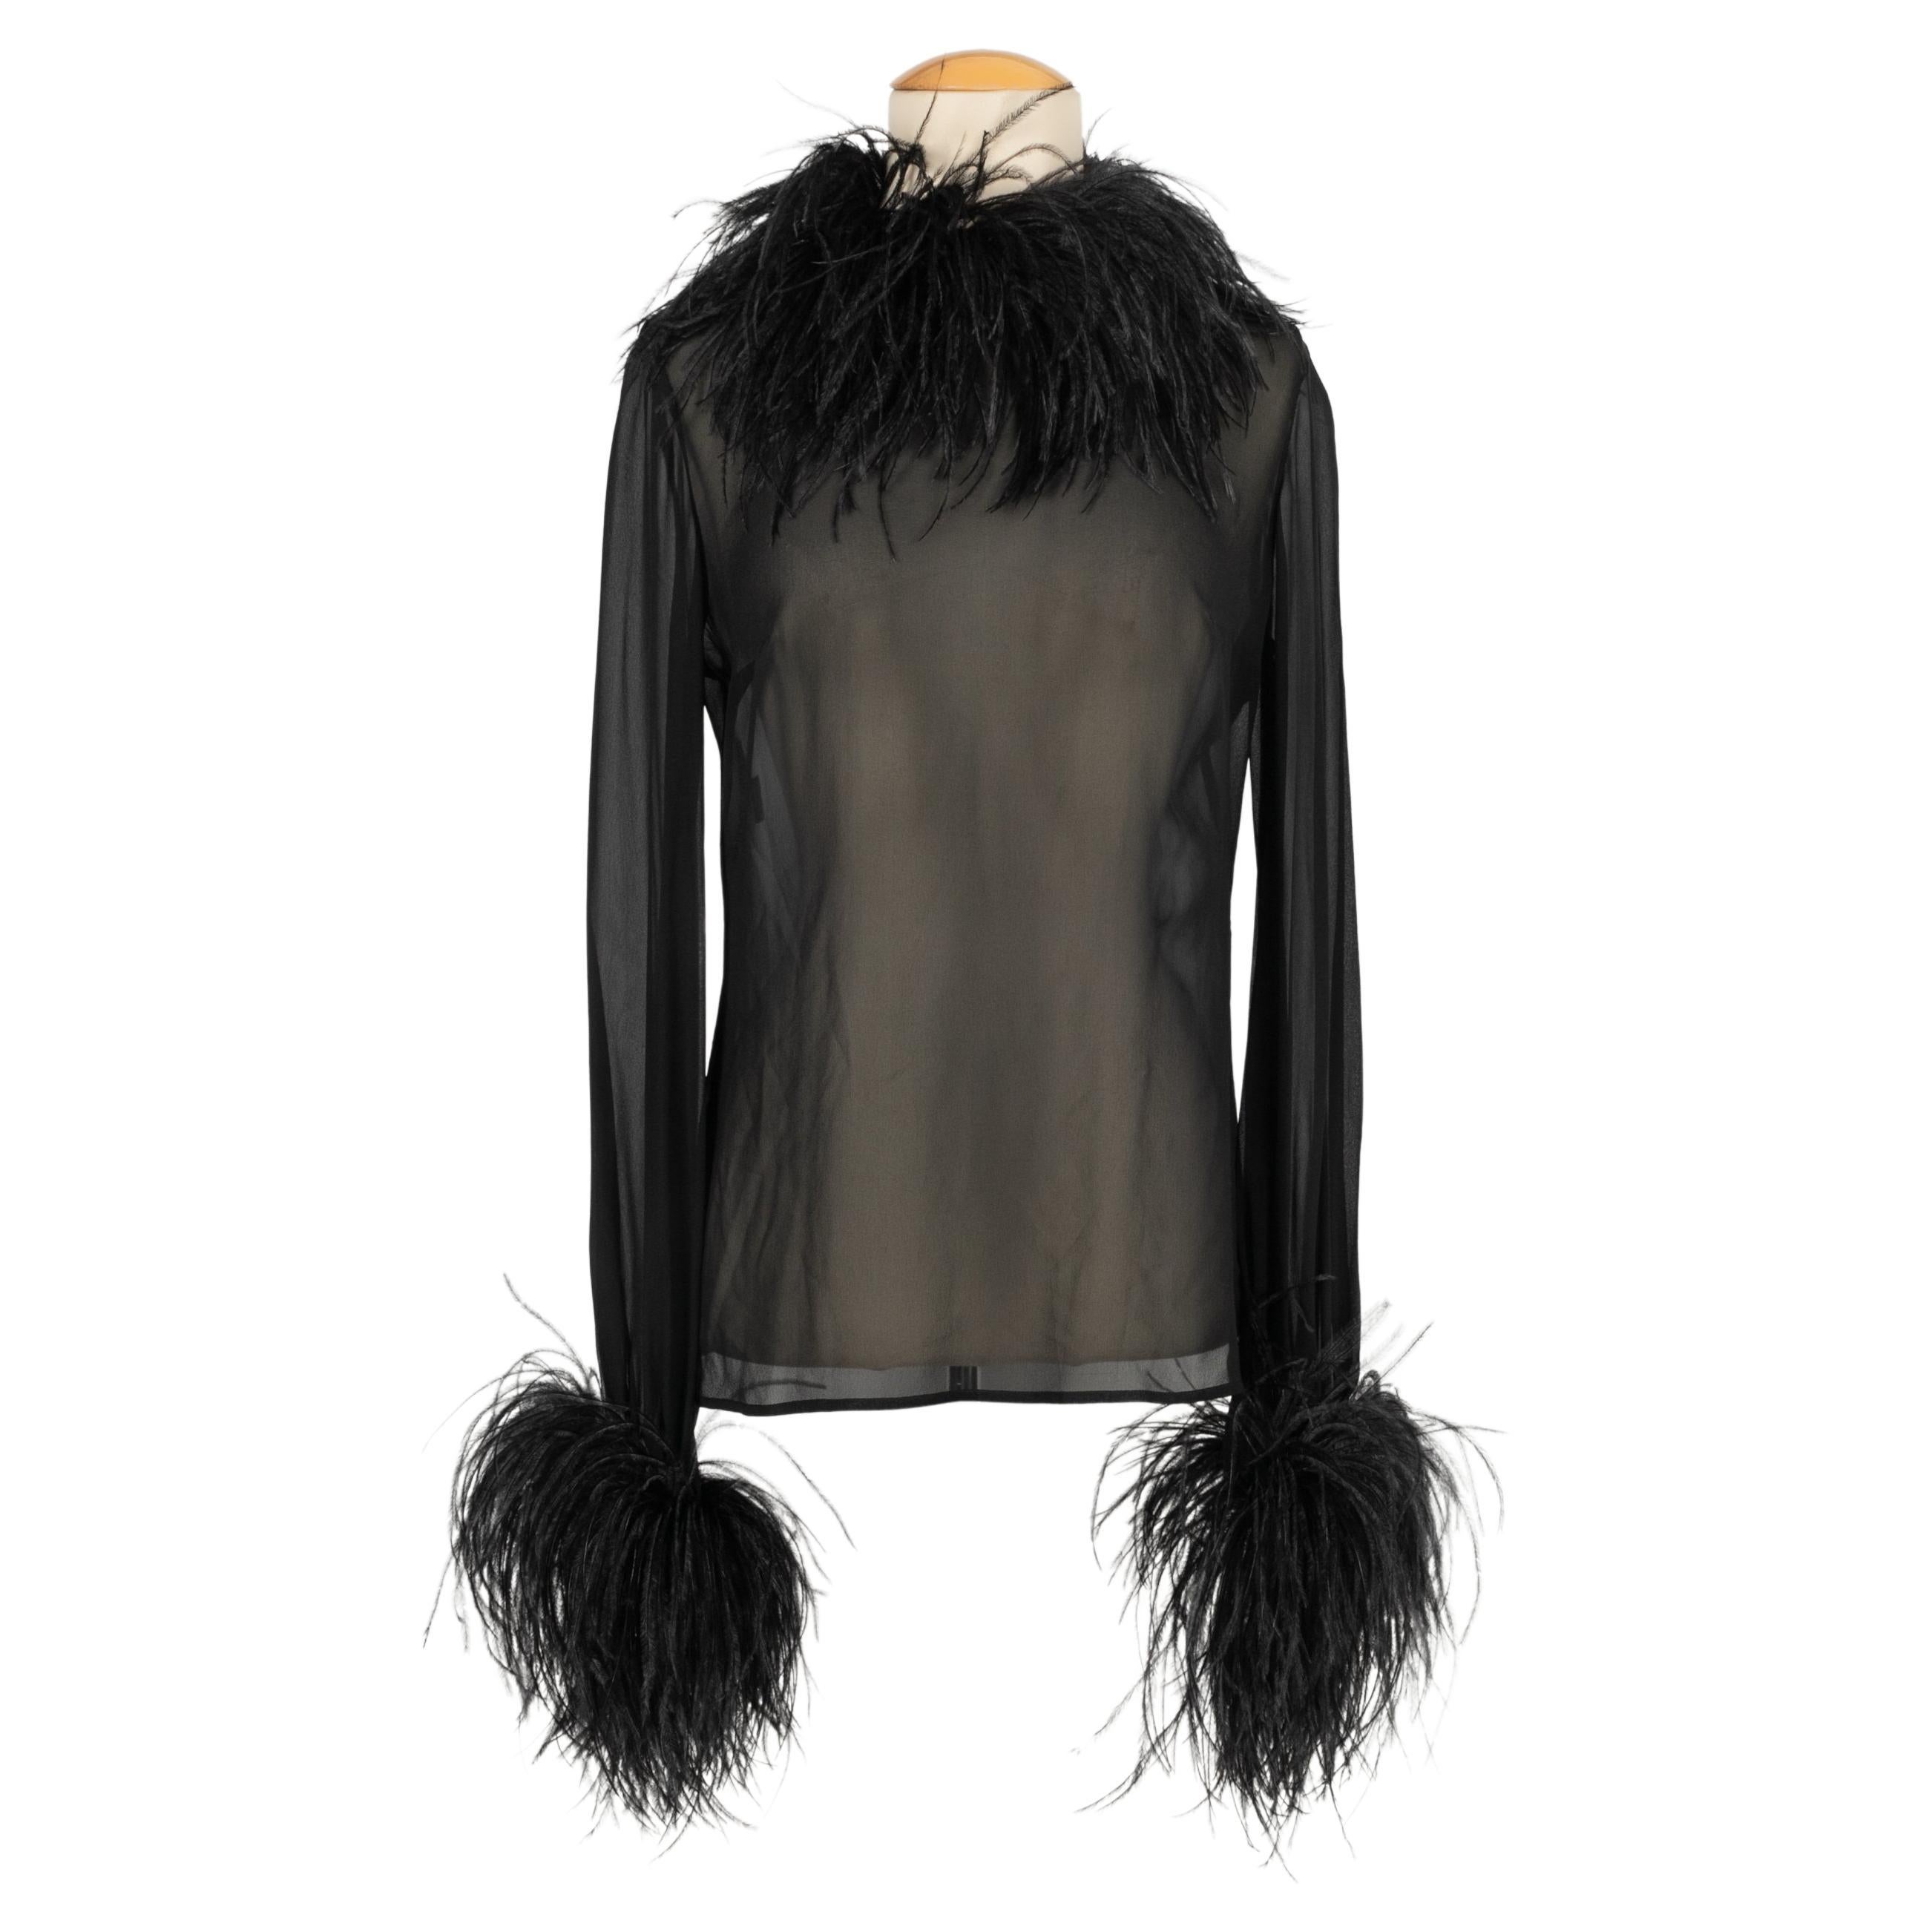 Dolce & Gabbana Feather and Black Silk Blouse